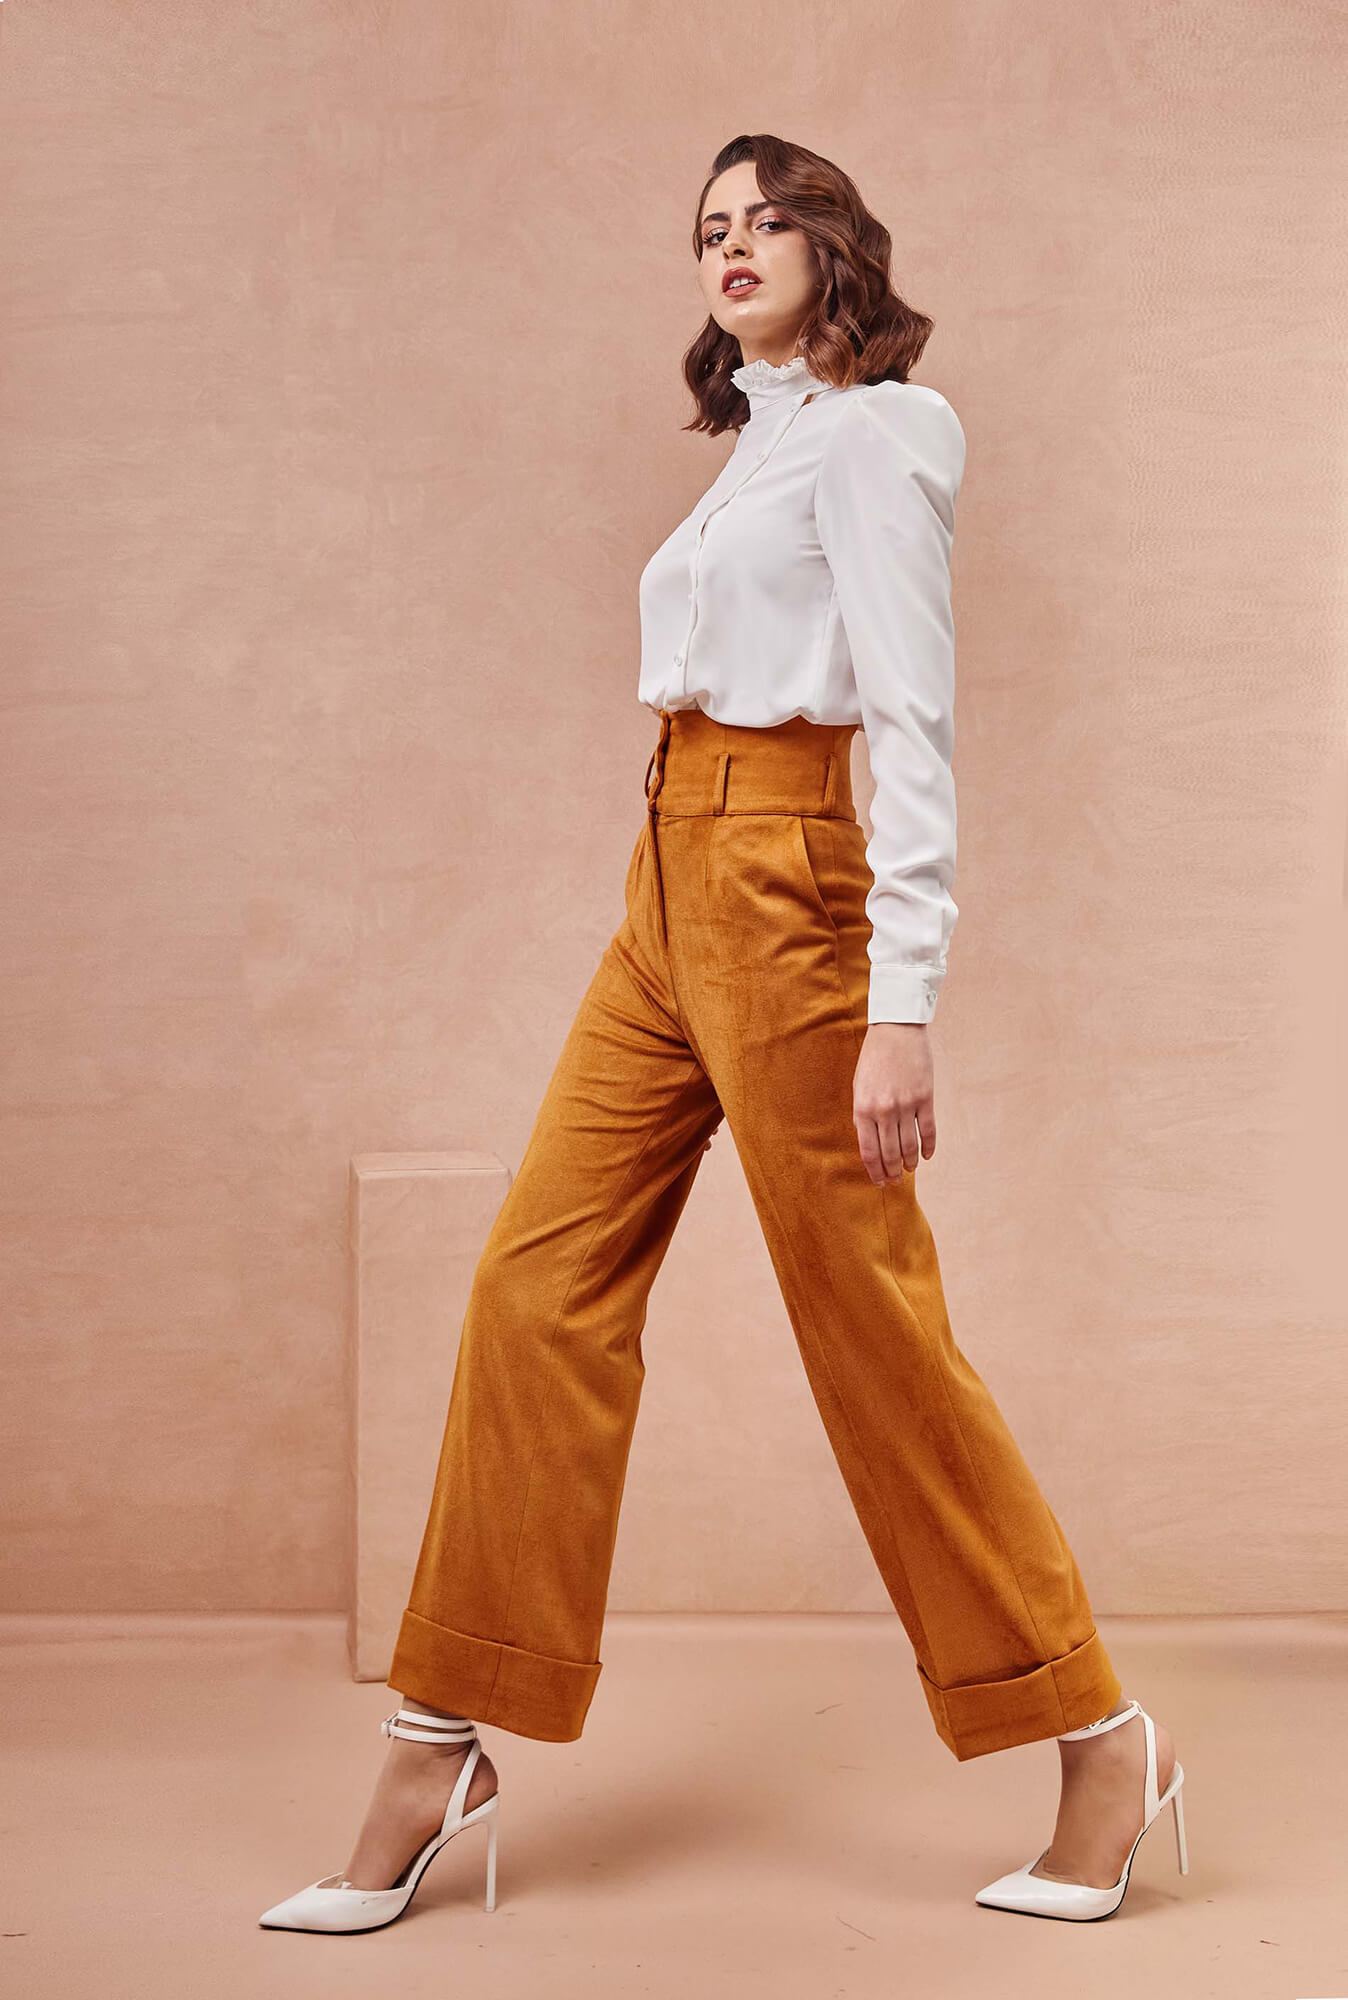 High Collar Side Button White Shirt with High Waisted Orange Pants